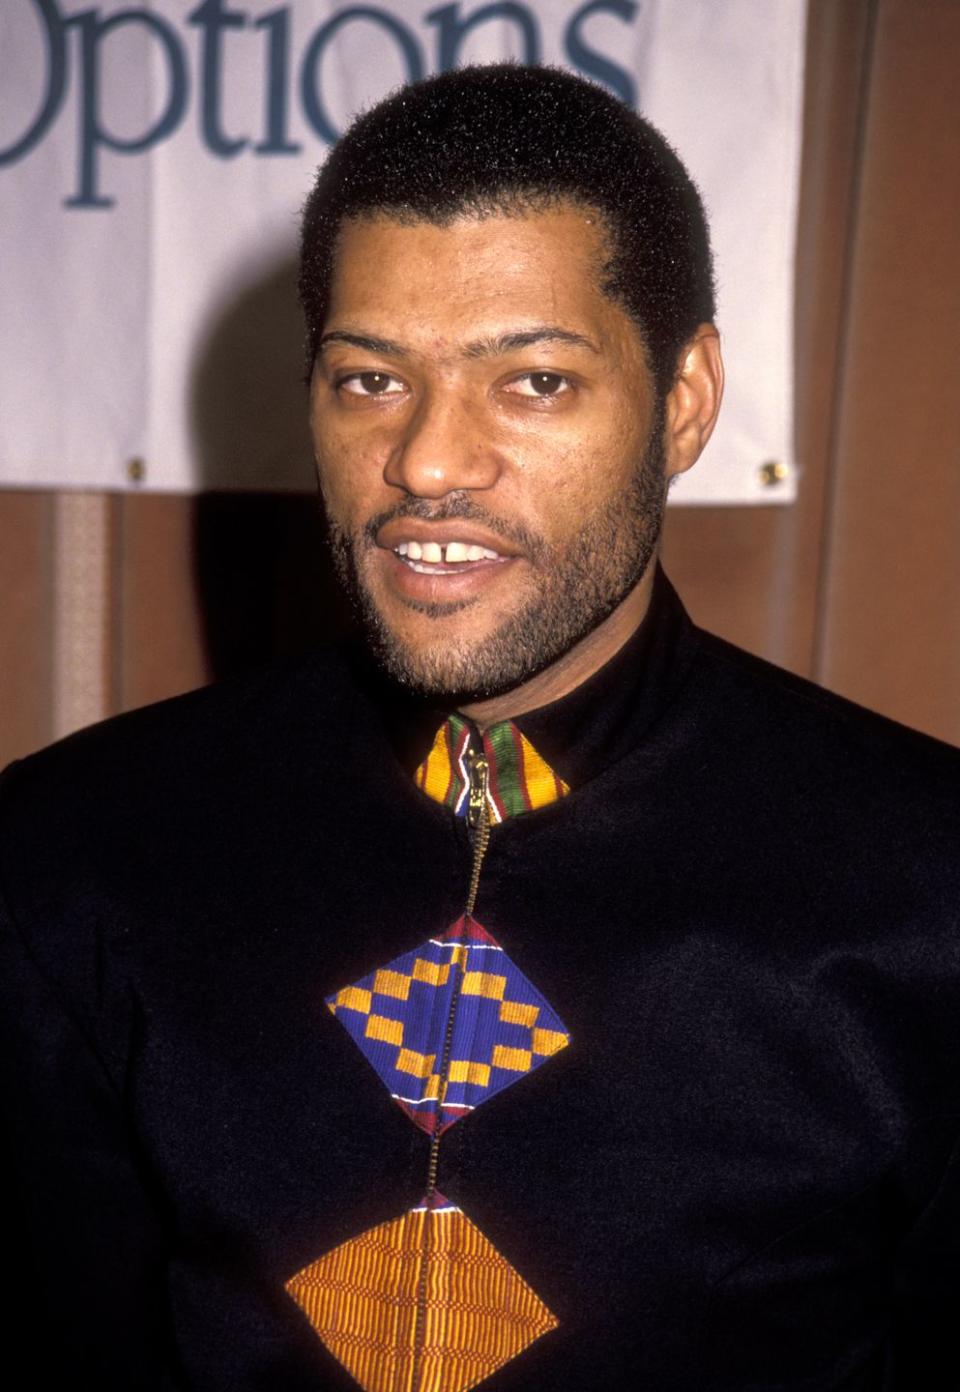 <p>Laurence Fishburne established himself as one of the top actors throughout the late '80s, but he undoubtedly became a leading man after his role in the 1991 film <em>Boyz n the Hood</em>. </p>